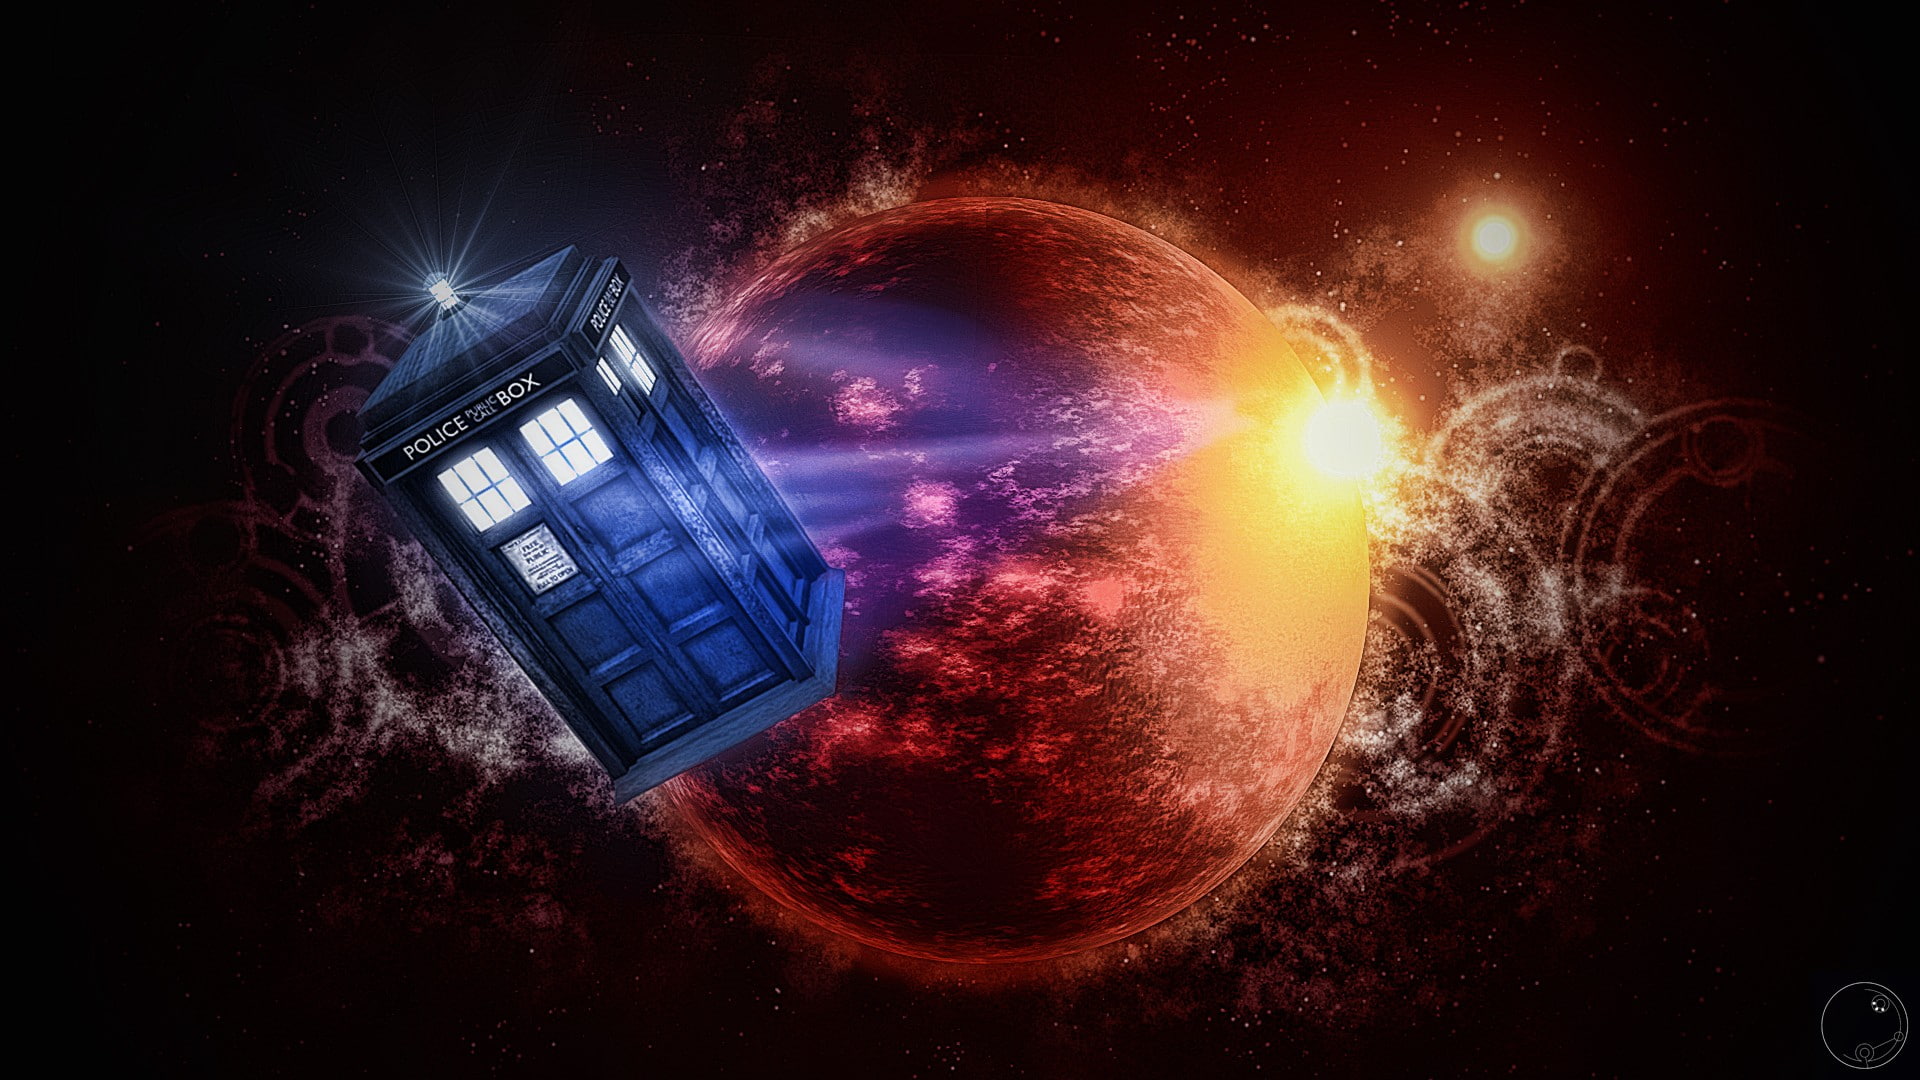 doctor who tardis the doctor artwork wallpaper 997048edc18aed8bd6e7585f1041662d